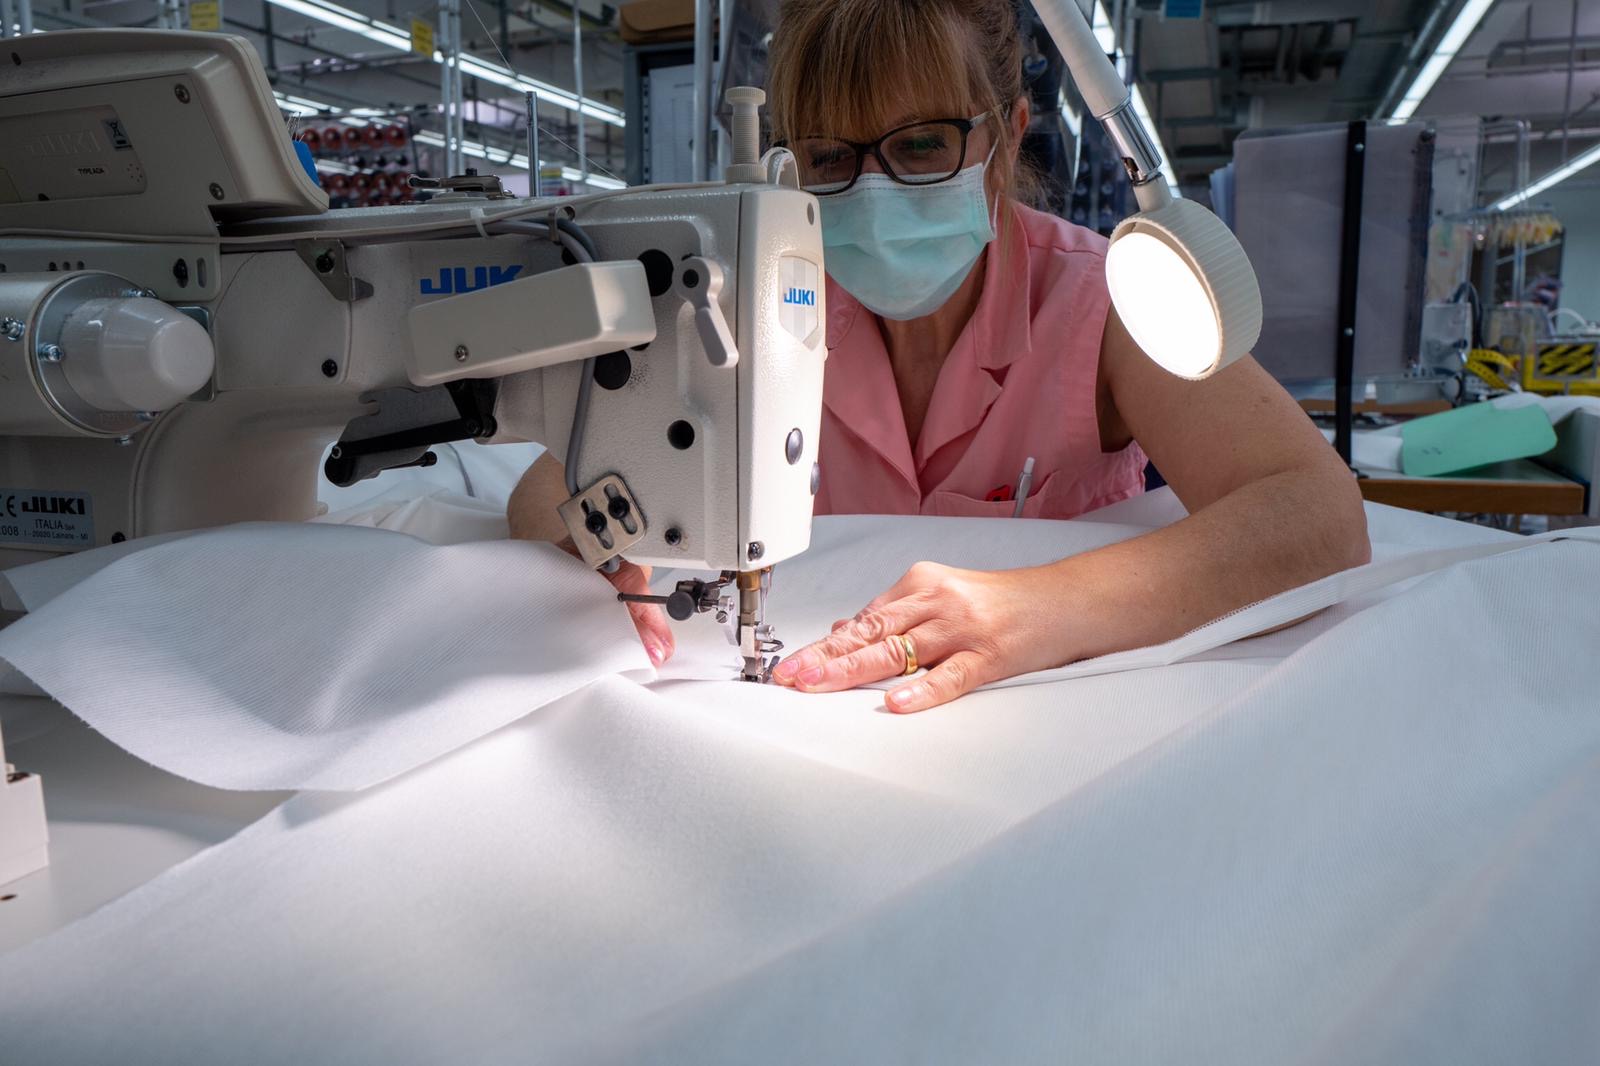 THE ZEGNA GROUP TO MANUFACTURE 280,000 PROTECTIVE HOSPITAL SUITS (2)